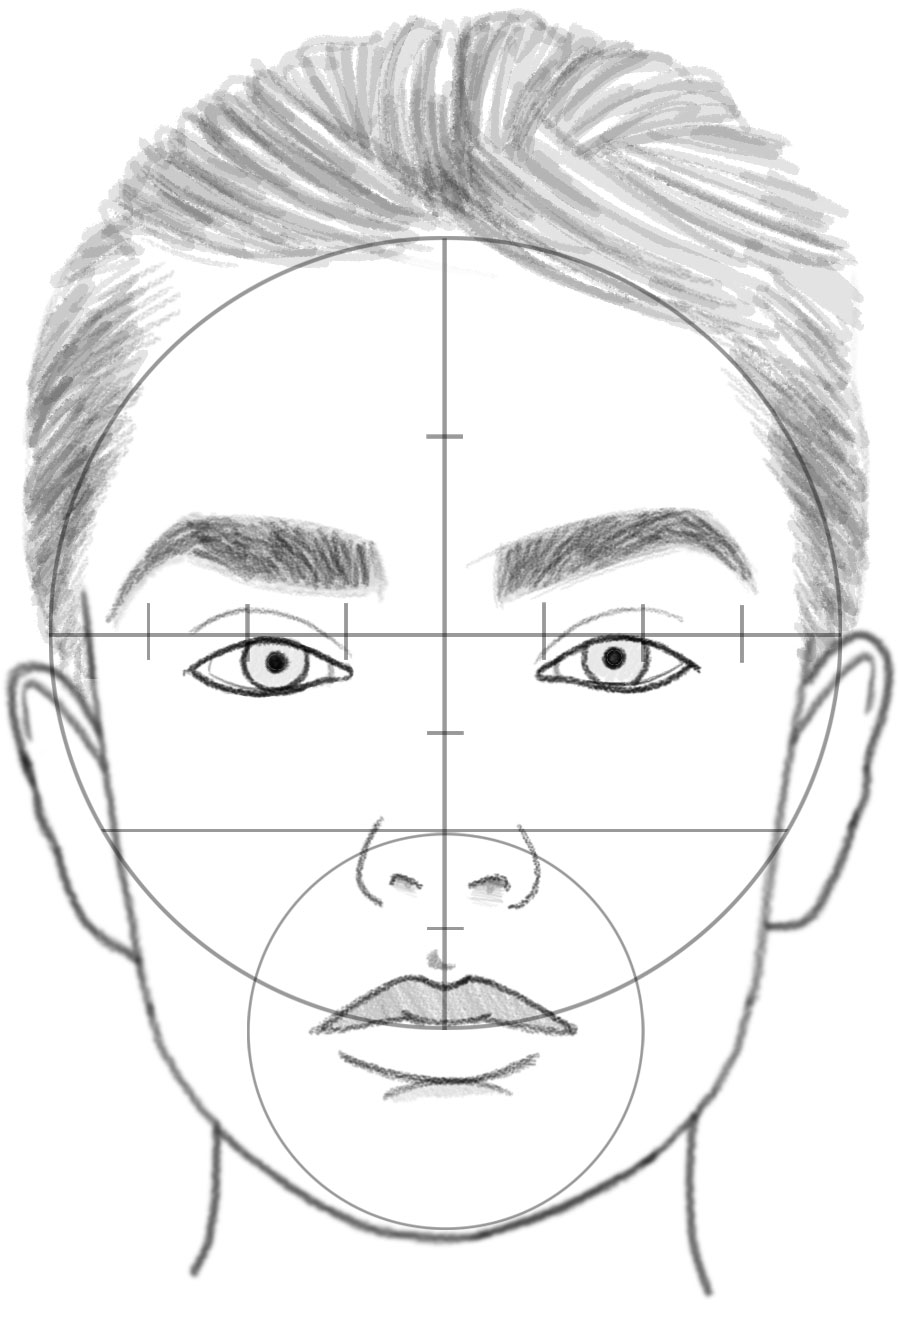 Free Illustration Tutorial - Foundation for Digitally Sketching a Face |  Udemy